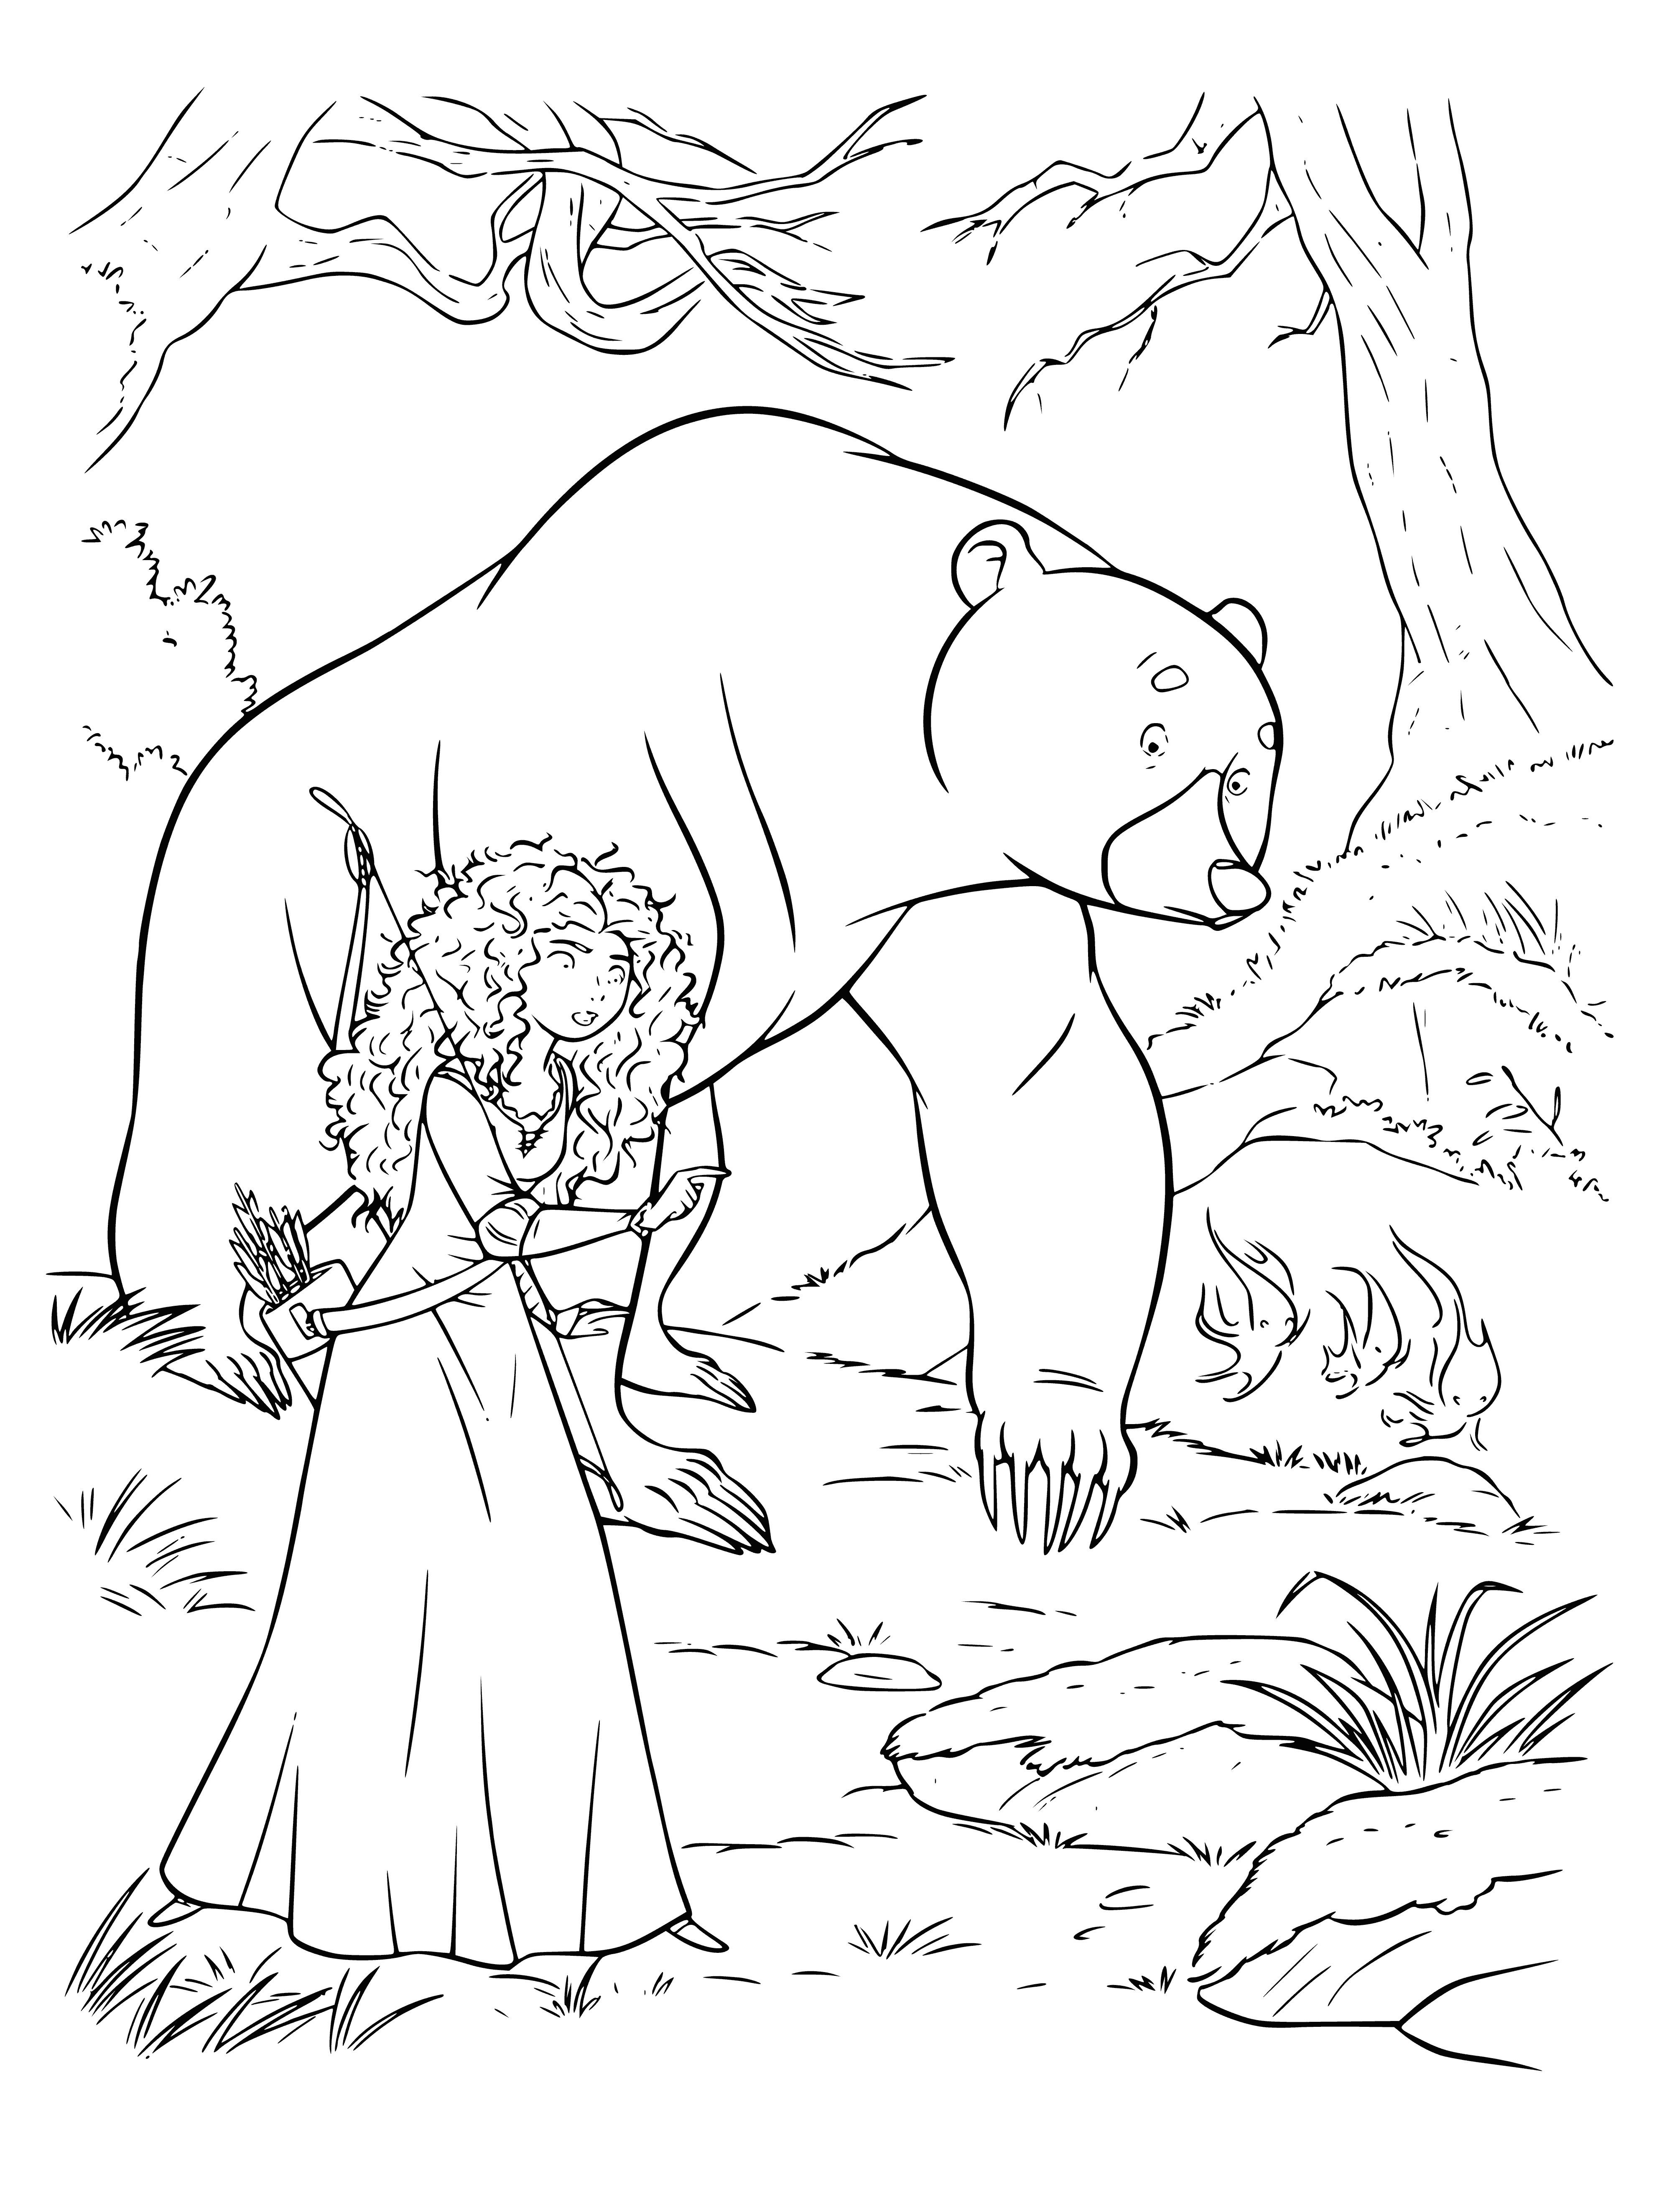 Merida and the bear are walking in the woods coloring page